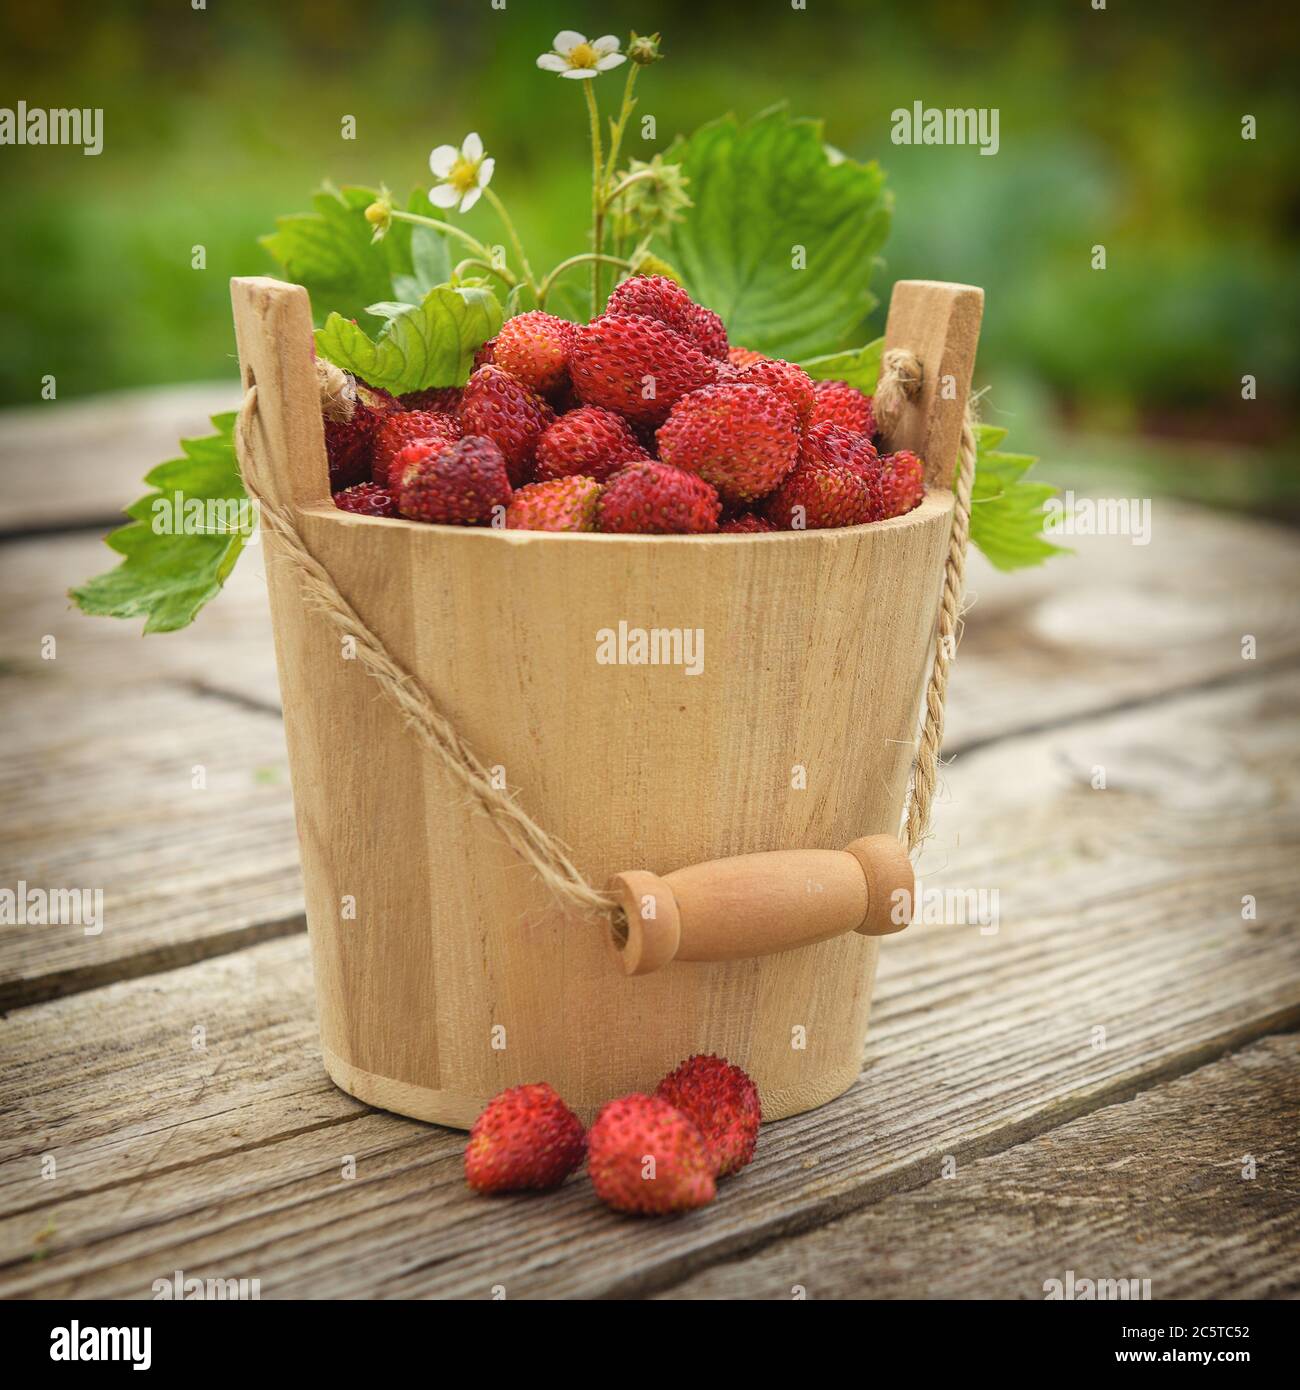 Fresh, juicy red strawberries in a wooden small bucket, stands on a wooden natural table. Stock Photo